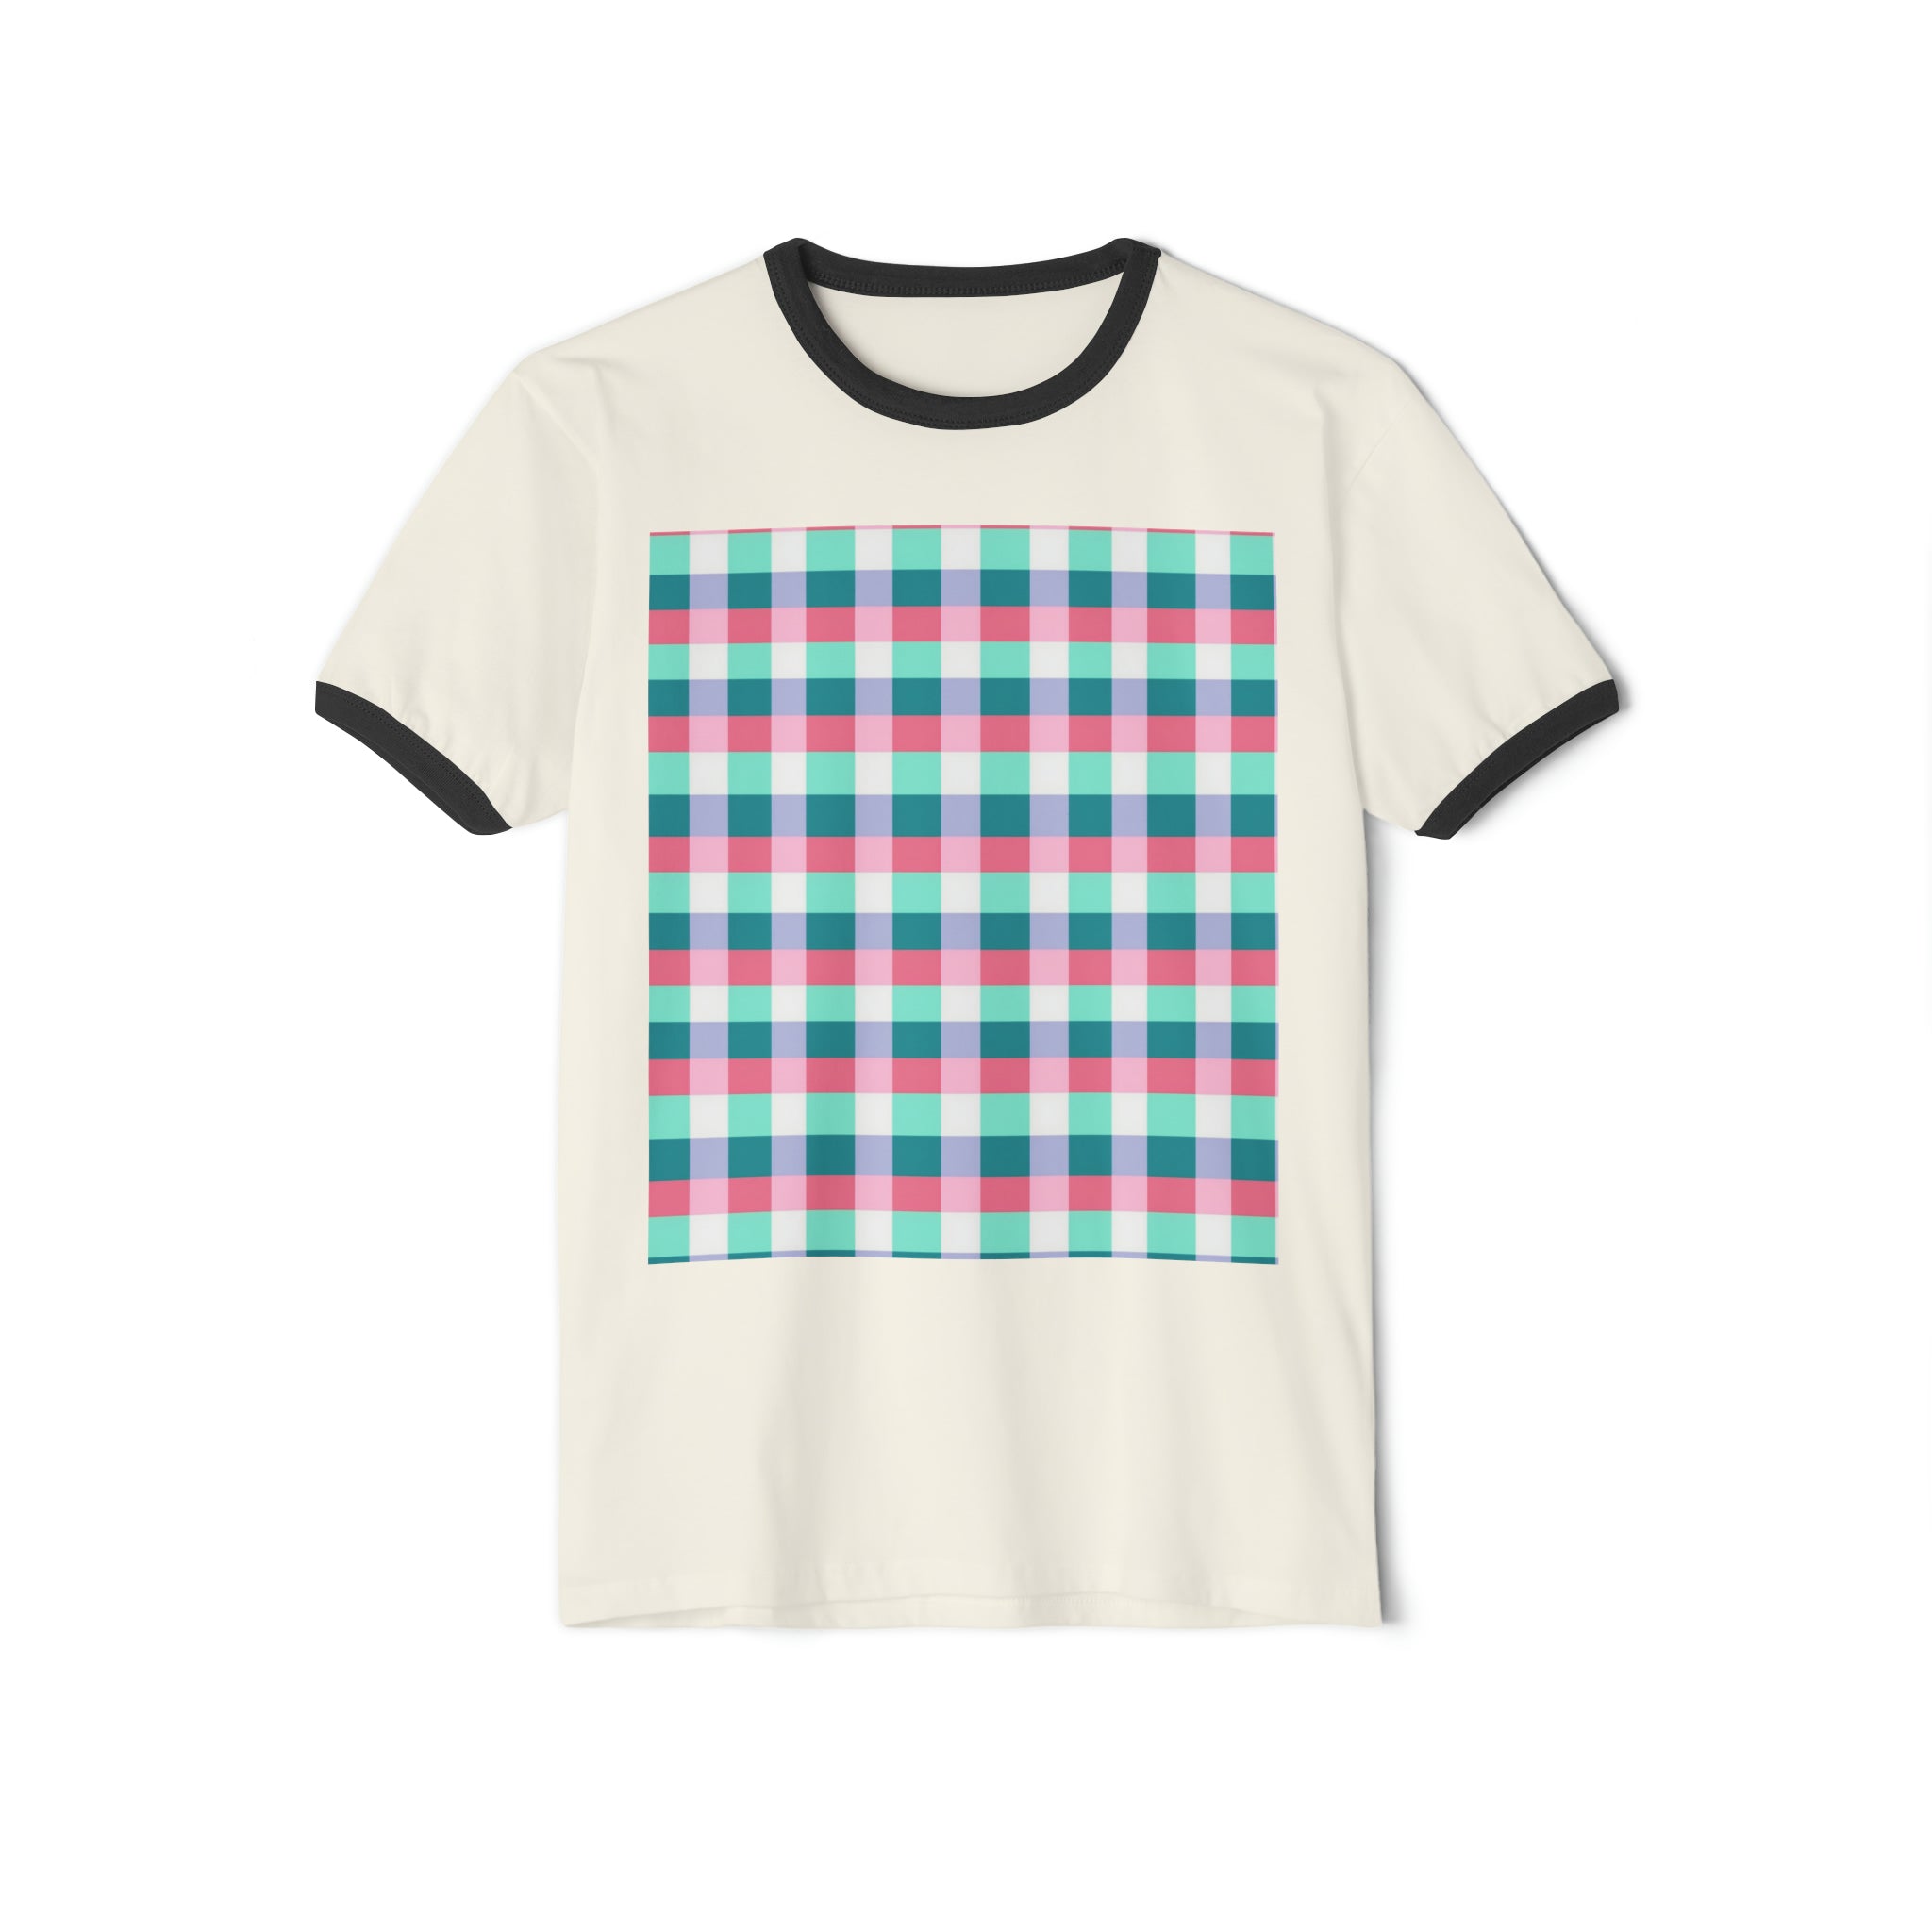 Unisex Cotton Ringer T-Shirt - Abstract Designs 03